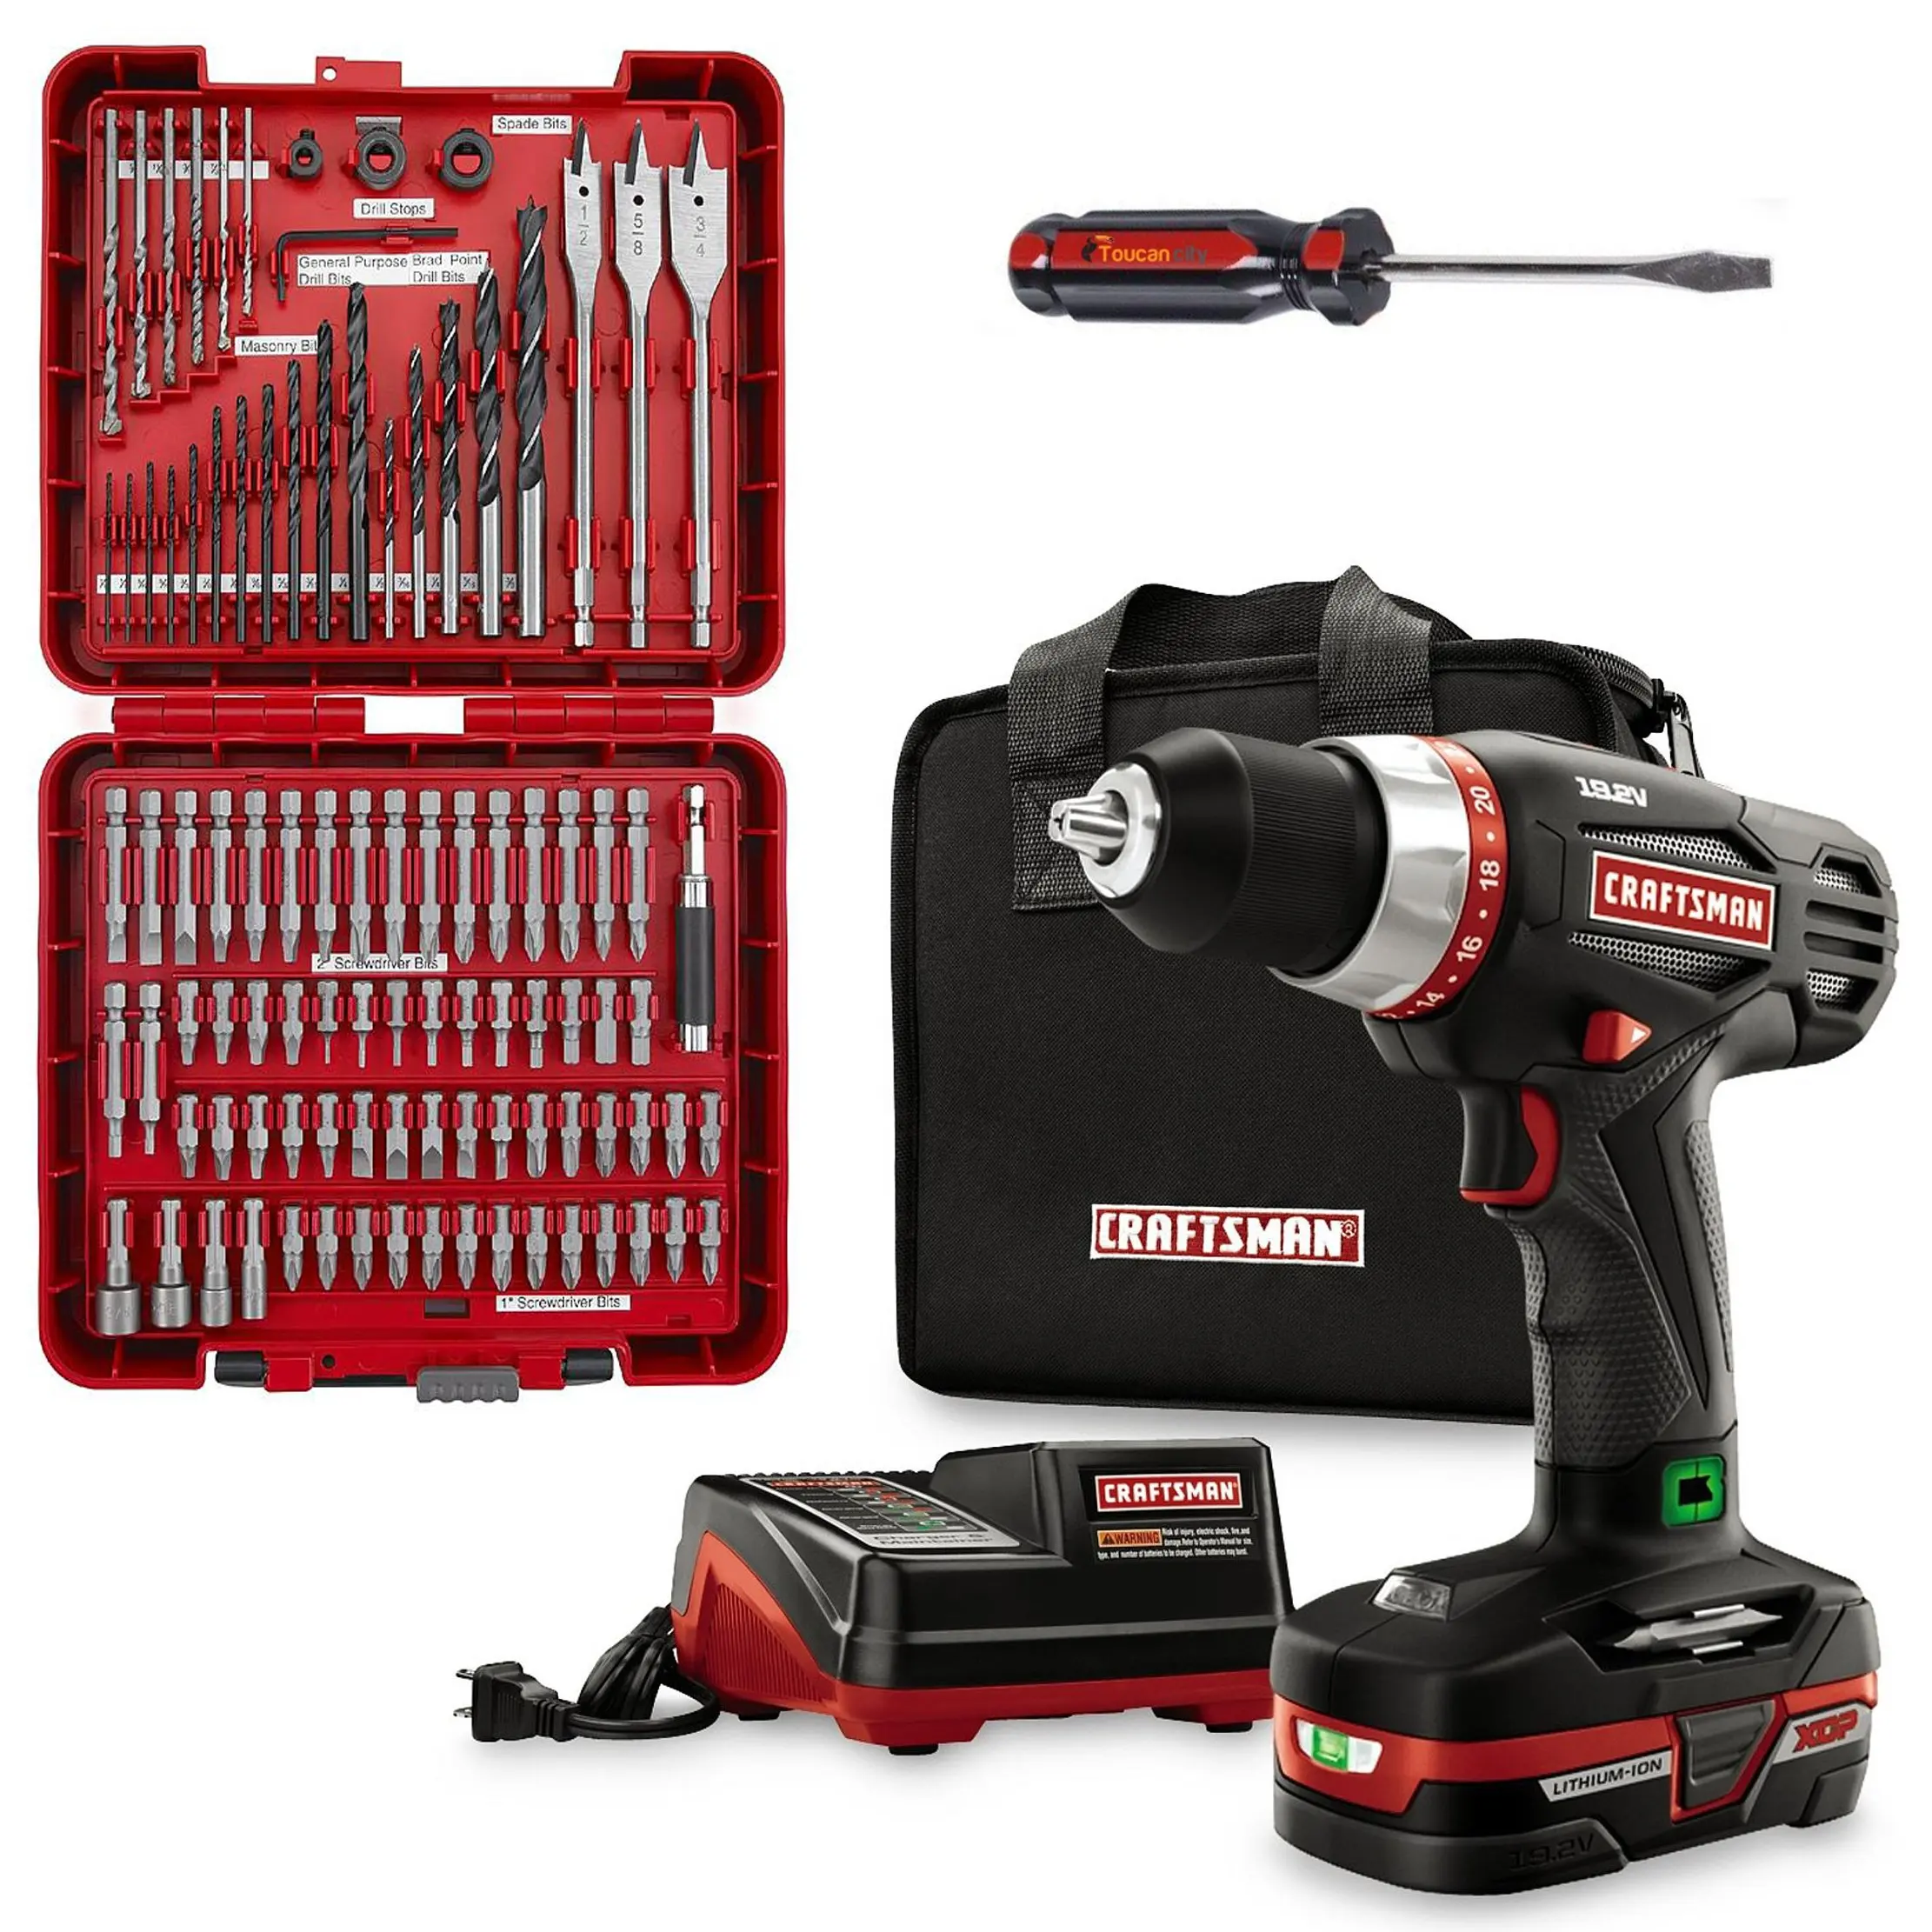 Cheap Craftsman Drill Kit, find Craftsman Drill Kit deals on line at